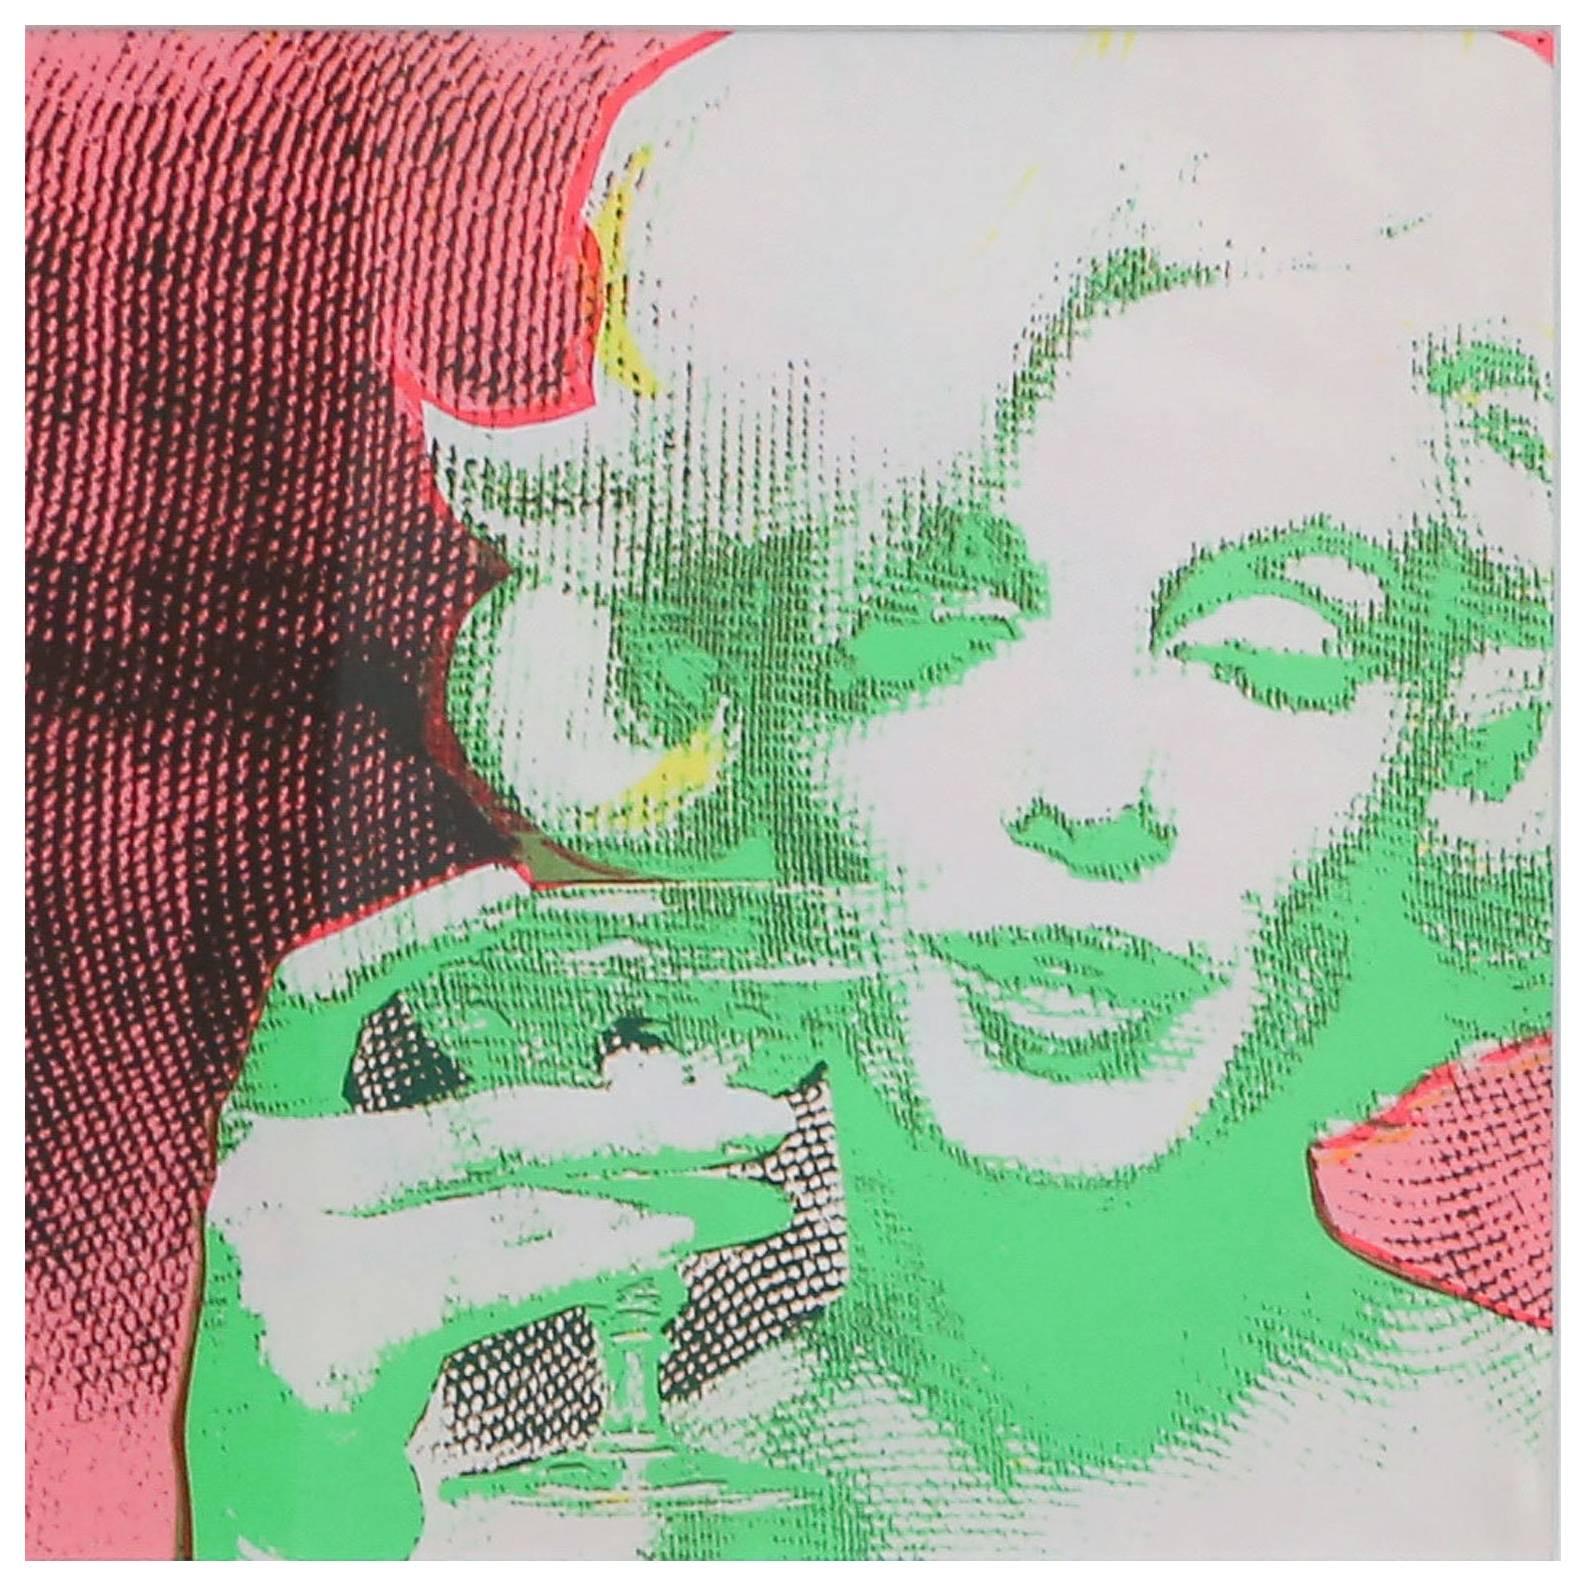 Original 1968 Marilyn Monroe serigraph: 'The Marilyn Monroe Trip - 2' by Burt Stern (1929-2013), after 'The Last Sitting.' Matted and framed in unfinished maple. Serigraph itself is 10 inches by 10 inches inside matting.

Unsigned, as released.